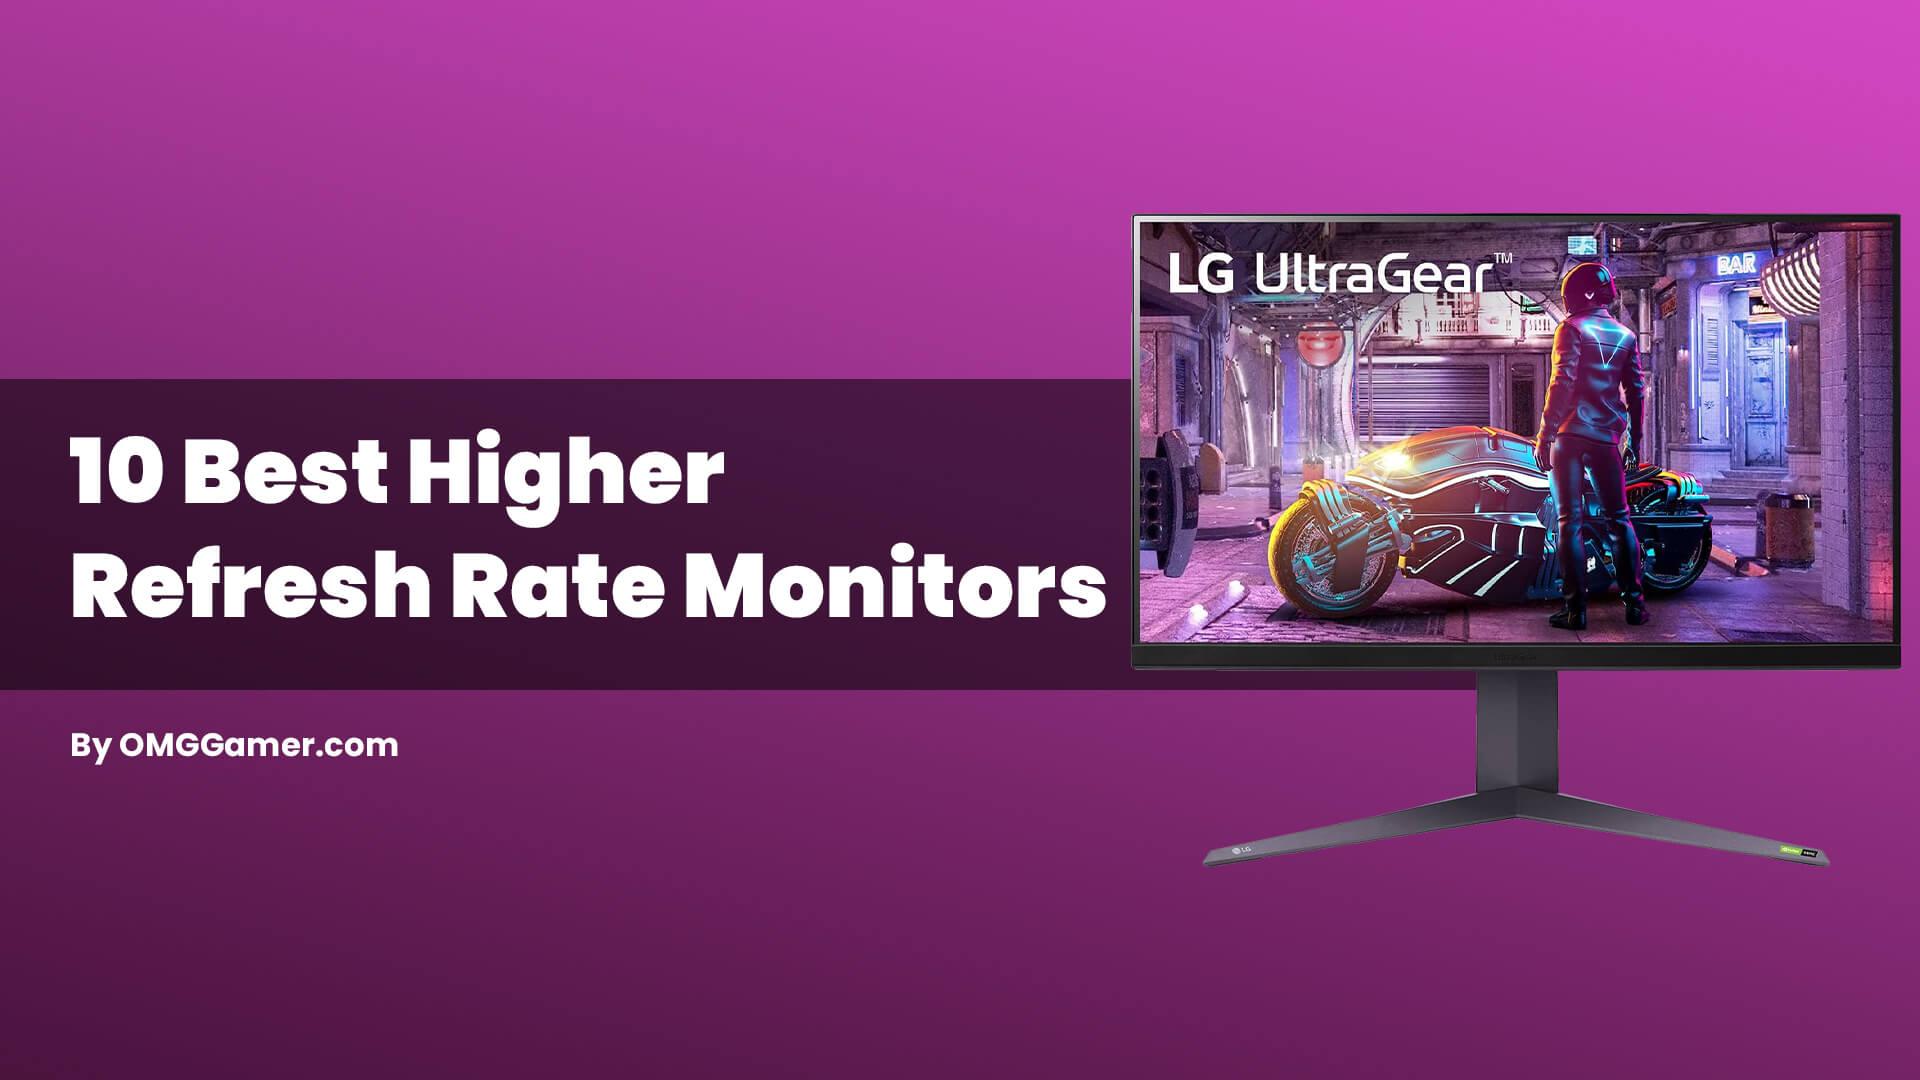 Best Higher Refresh Rate Monitors